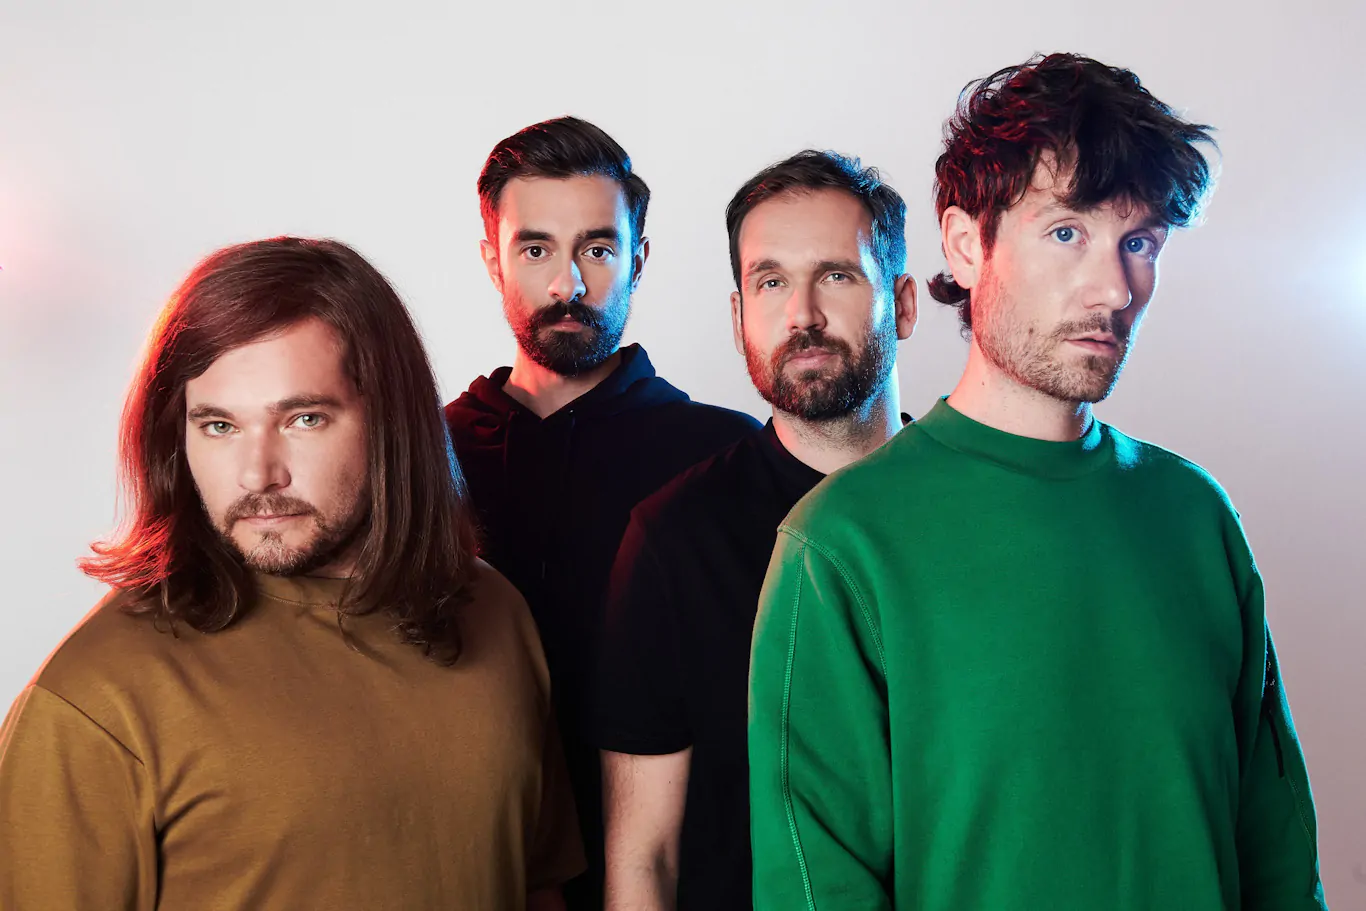 BASTILLE announce ‘MTV Unplugged: Bastille’ released exclusively on vinyl for Record Store Day